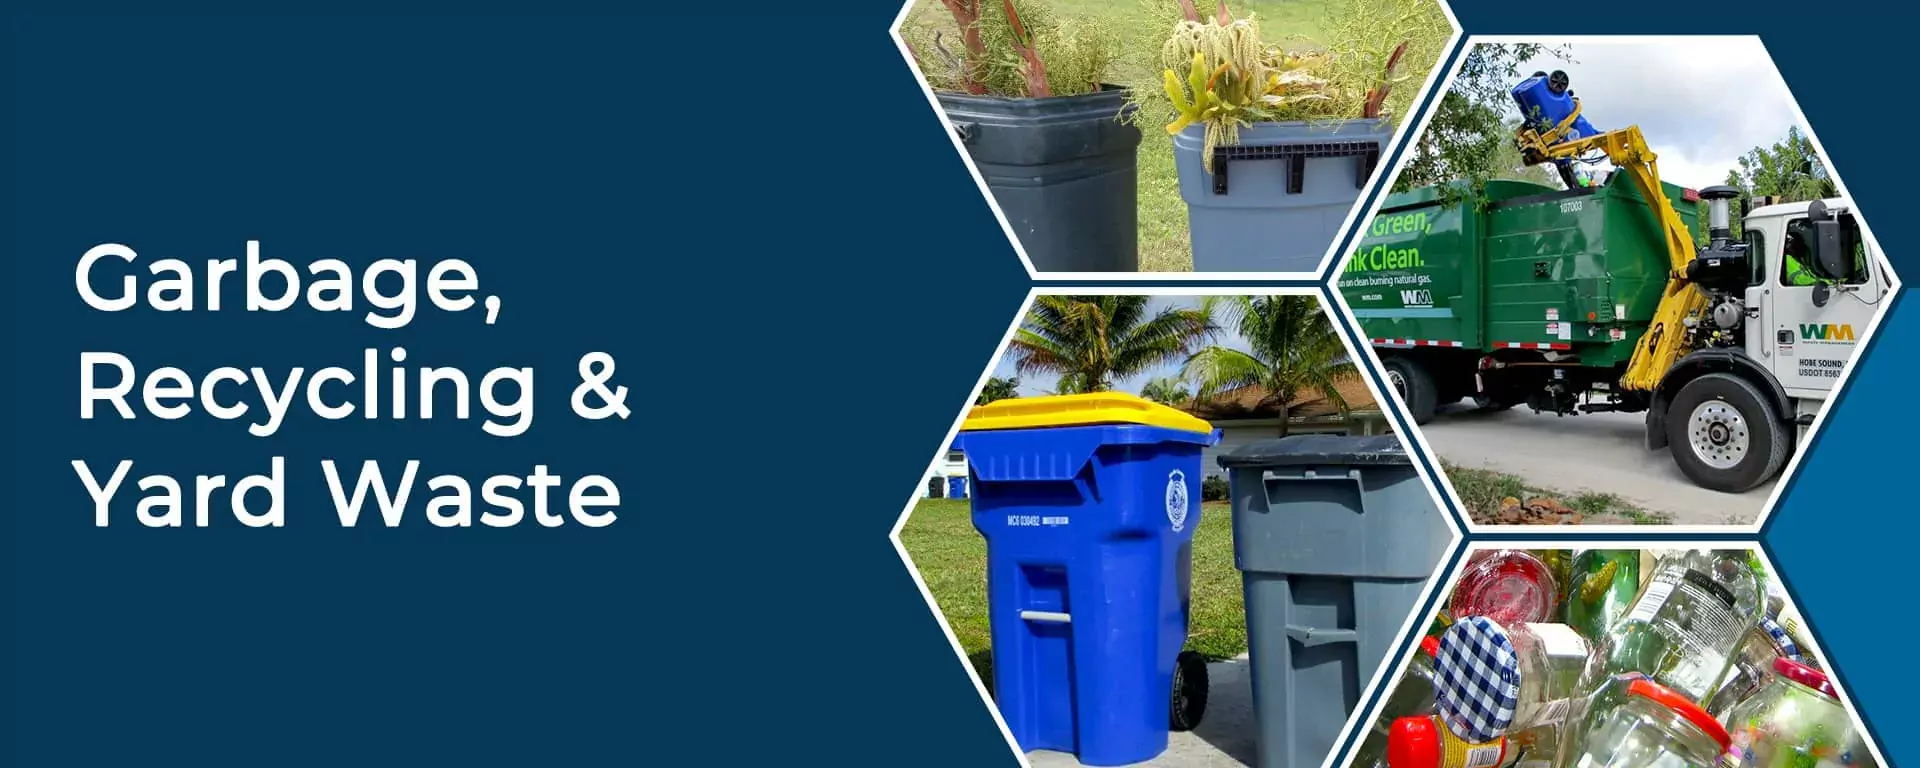 Garbage, Recycling and Yard Waste